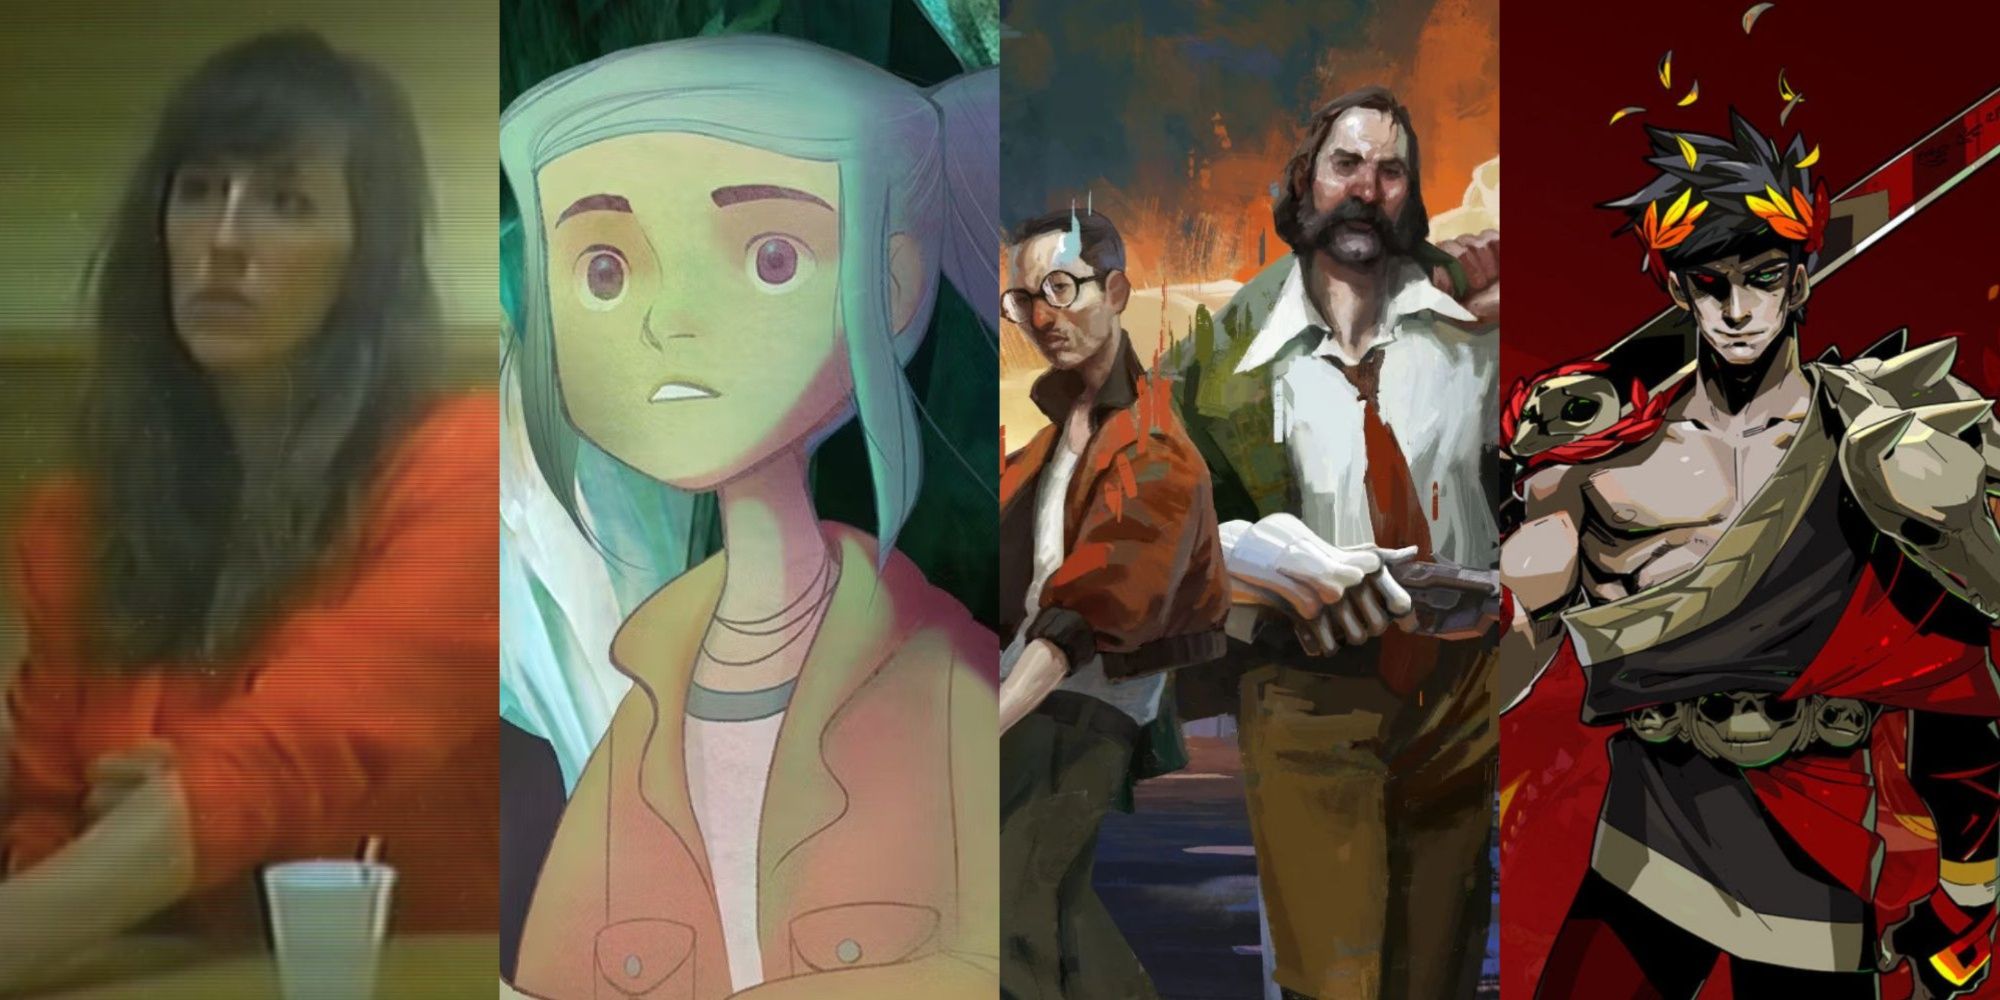 Four-image collage of the main protagonists from Her Story, Oxenfree, Disco Elysium, and Hades.